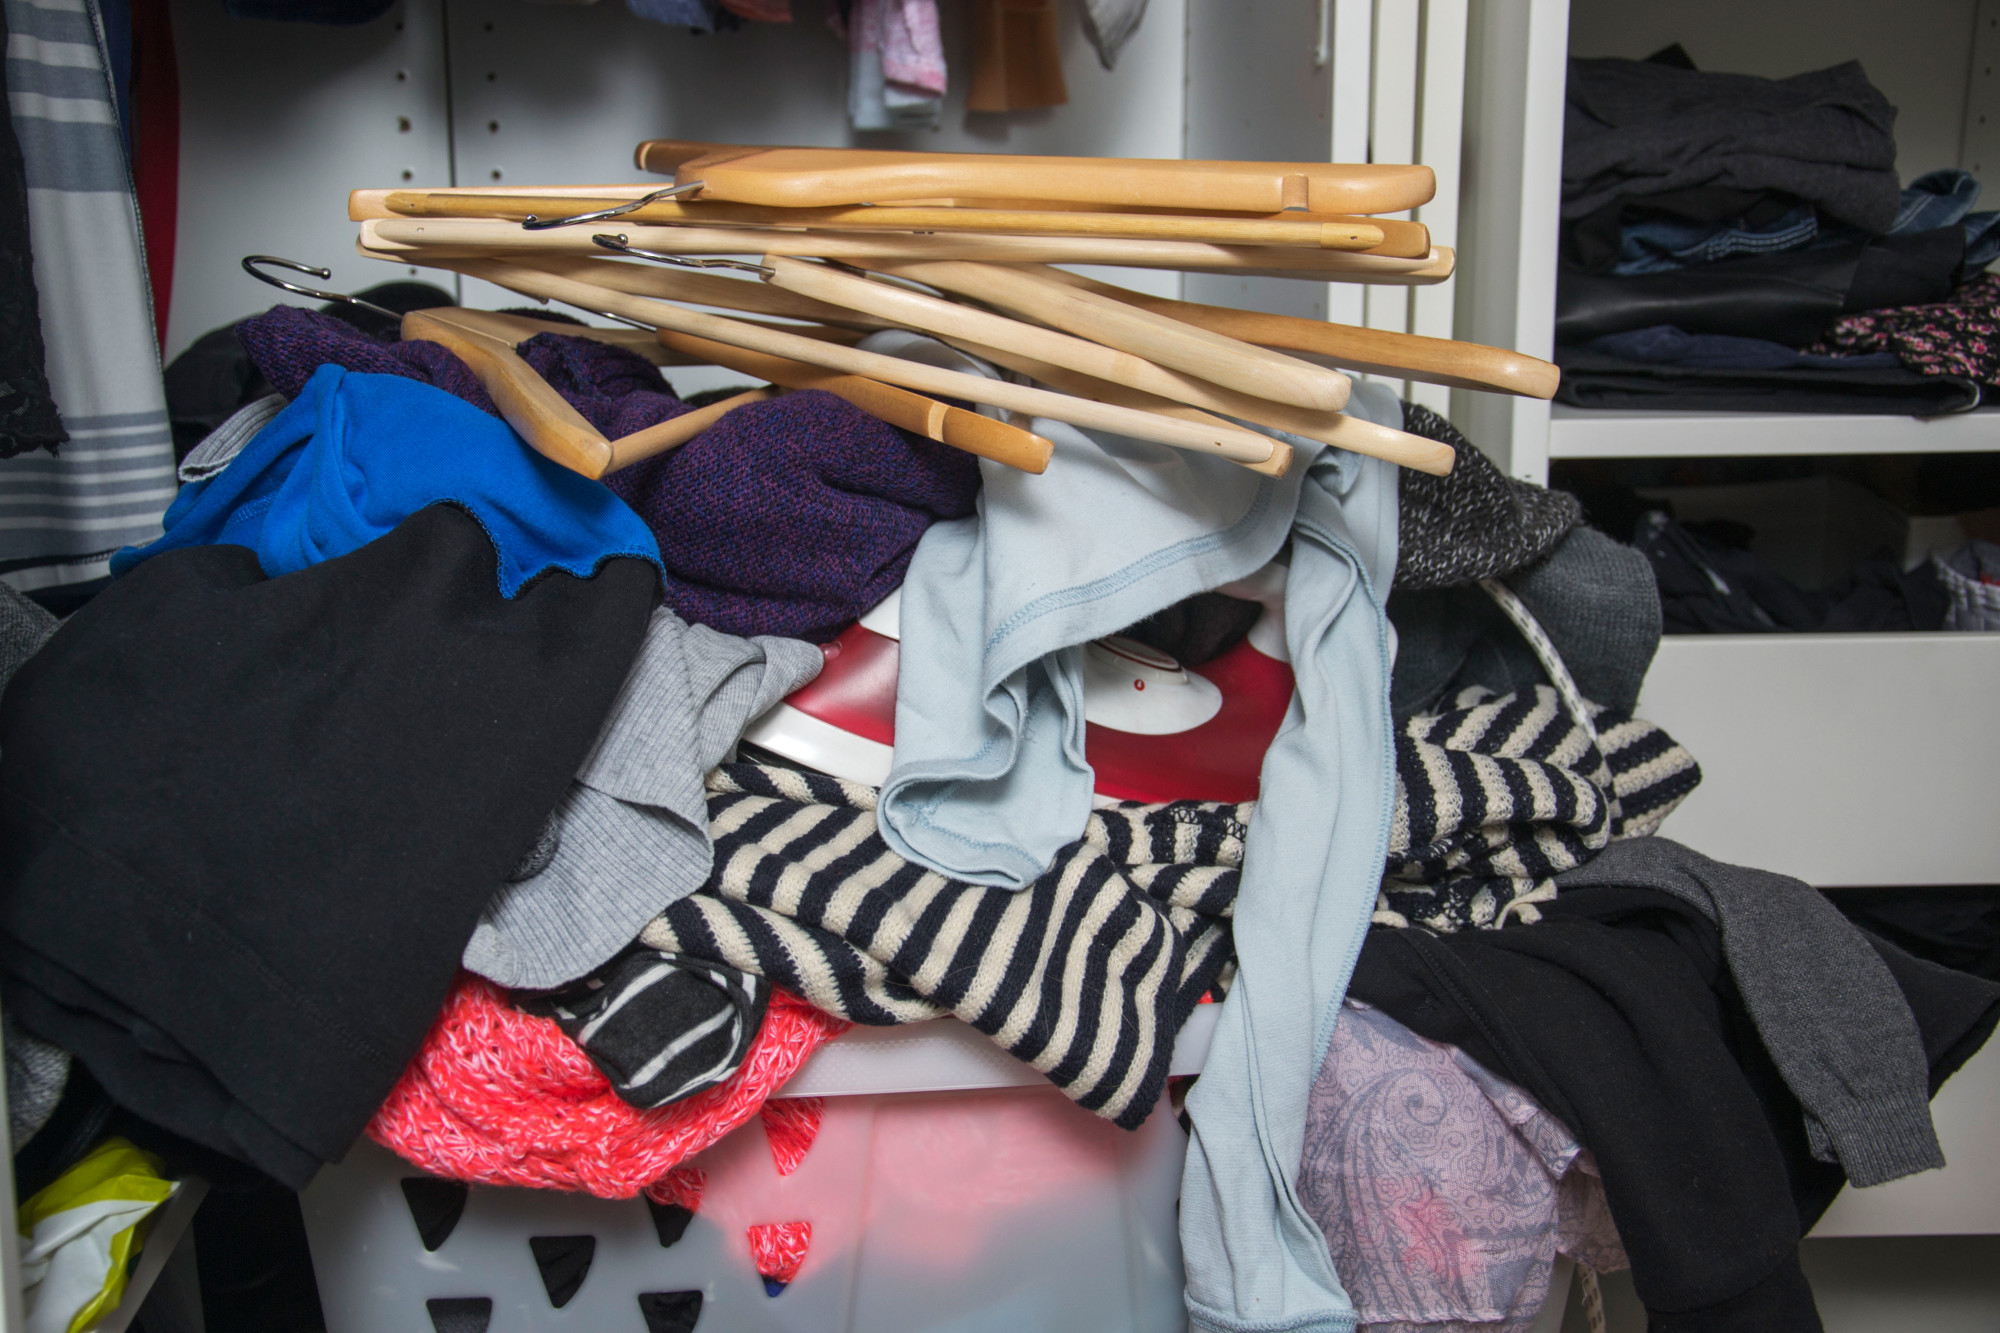 http://bookdirtbusters.com/wp-content/uploads/2021/07/how-to-clean-out-a-closet.jpeg